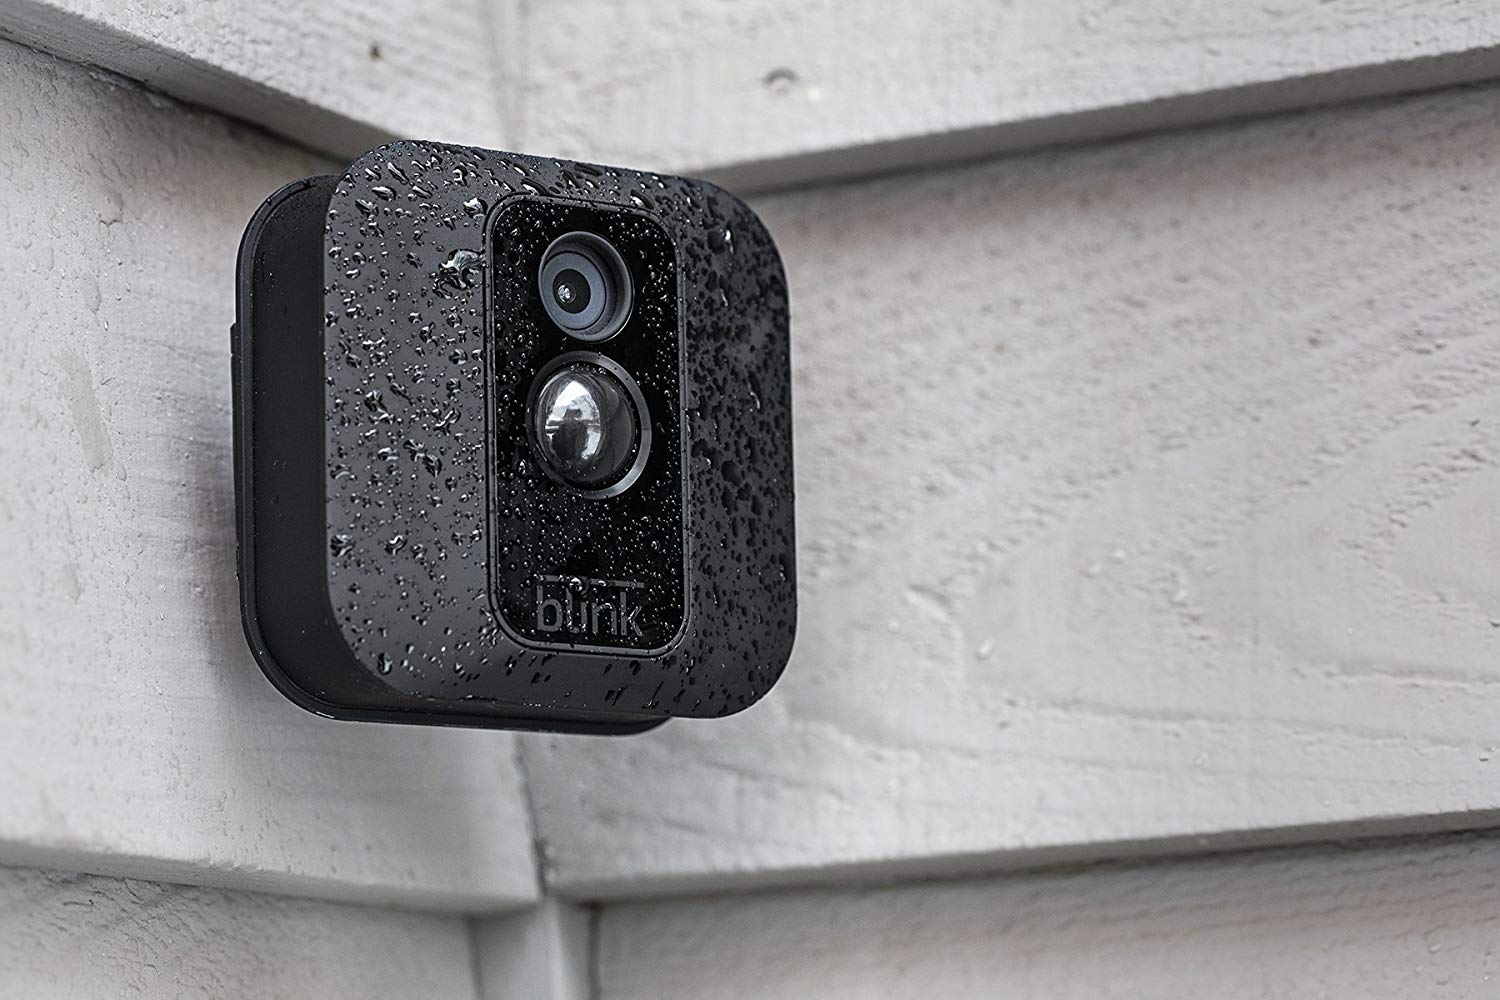 A Blink security camera covered in raindrops mounted in an exterior corner of a house.